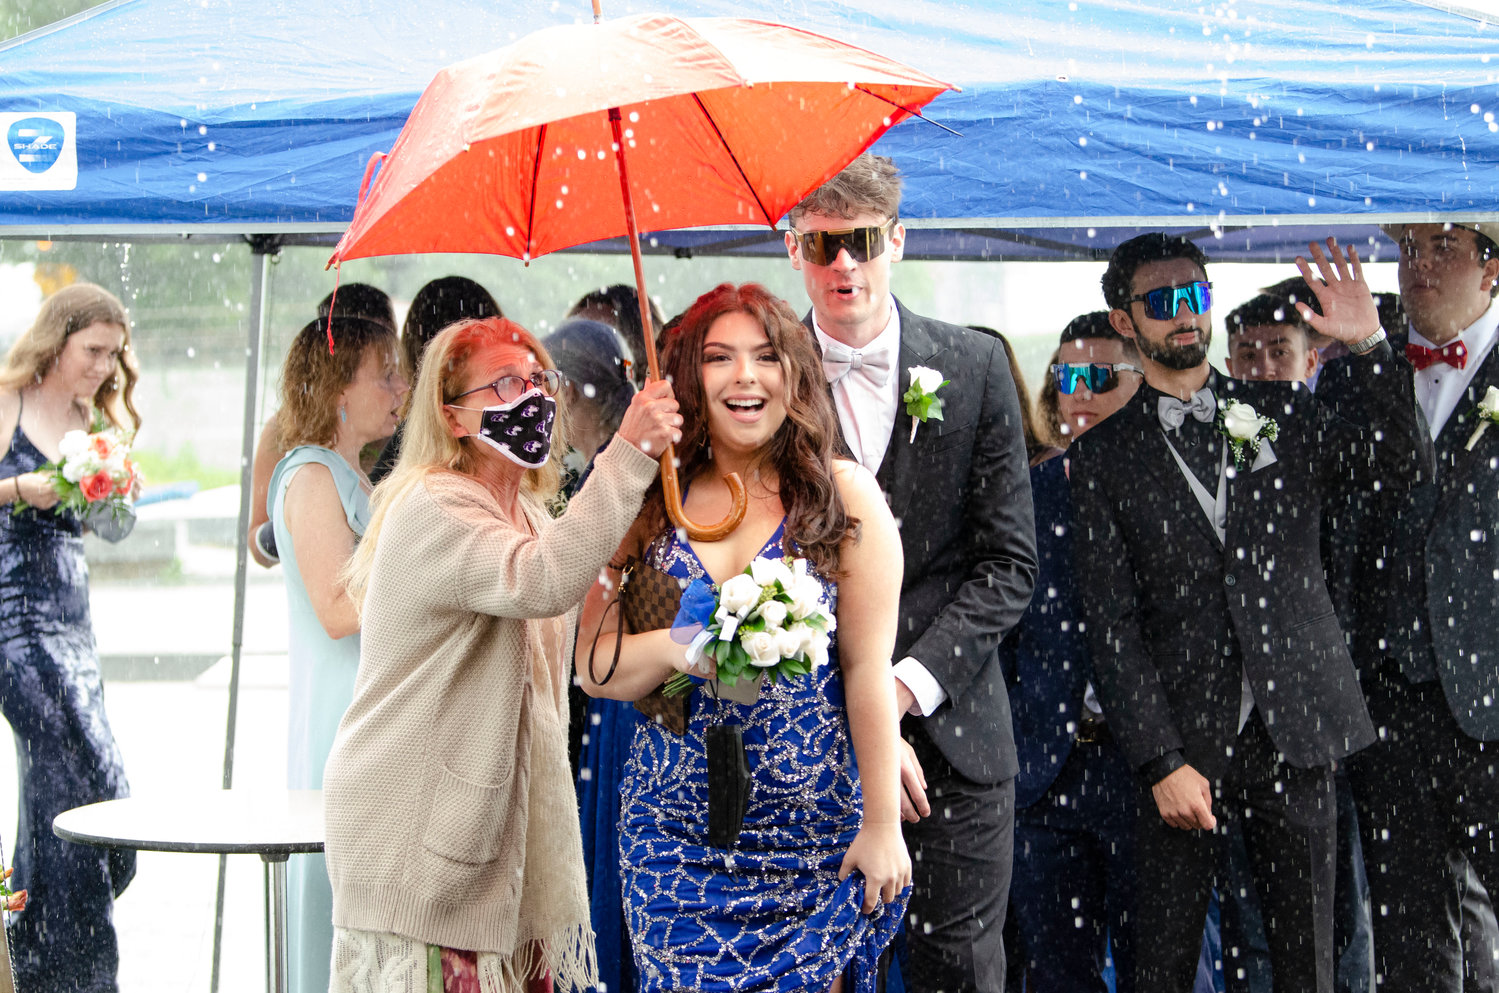 Back in June, Mt. Hope High School Principal Deborah DiBiase spent part of the Senior Prom helping students cross from tent to tent on a rainy night, during the event hosted along the Herreshoff Marine Museum waterfront. This fall, the school decided it is not safe hold the traditional Homecoming dance.